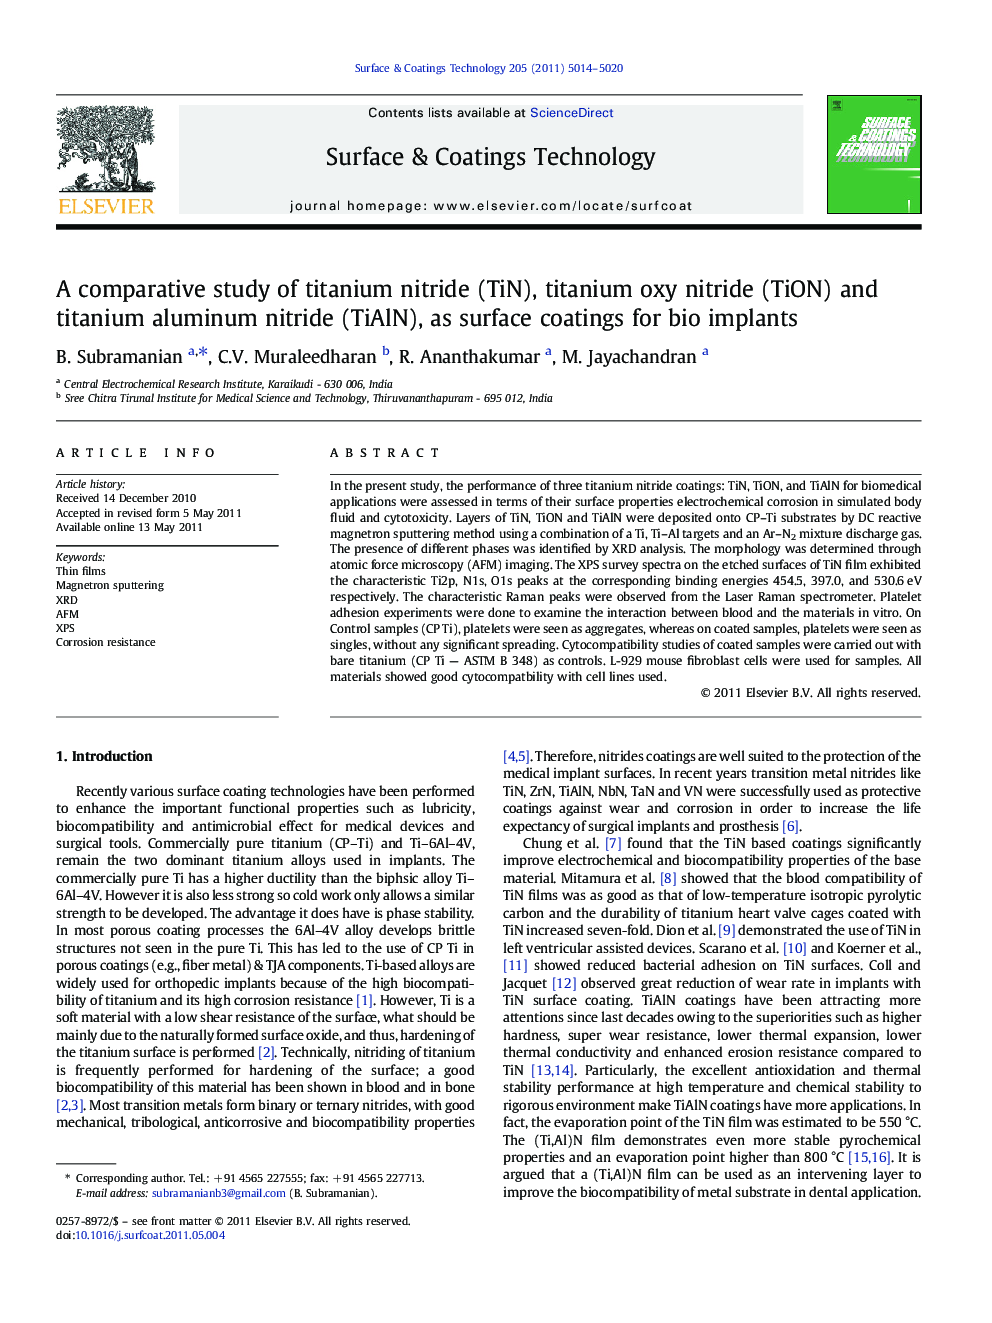 A comparative study of titanium nitride (TiN), titanium oxy nitride (TiON) and titanium aluminum nitride (TiAlN), as surface coatings for bio implants